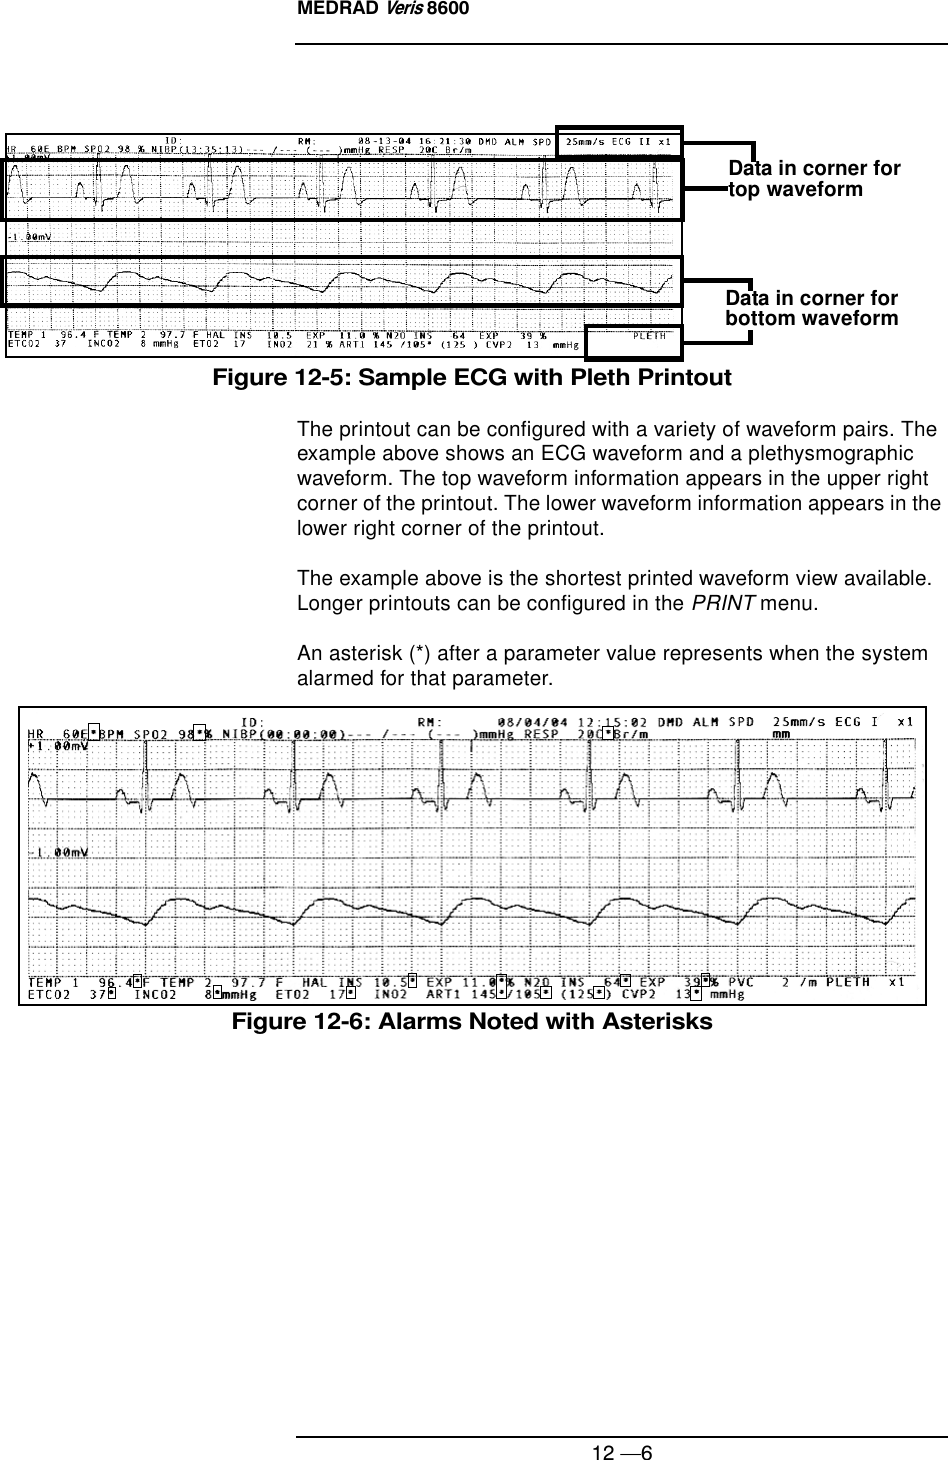 MEDRAD Veris 860012 —6Figure 12-5: Sample ECG with Pleth PrintoutThe printout can be configured with a variety of waveform pairs. The example above shows an ECG waveform and a plethysmographic waveform. The top waveform information appears in the upper right corner of the printout. The lower waveform information appears in the lower right corner of the printout.The example above is the shortest printed waveform view available. Longer printouts can be configured in the PRINT menu.An asterisk (*) after a parameter value represents when the system alarmed for that parameter.Figure 12-6: Alarms Noted with AsterisksData in corner for top waveformData in corner for bottom waveform